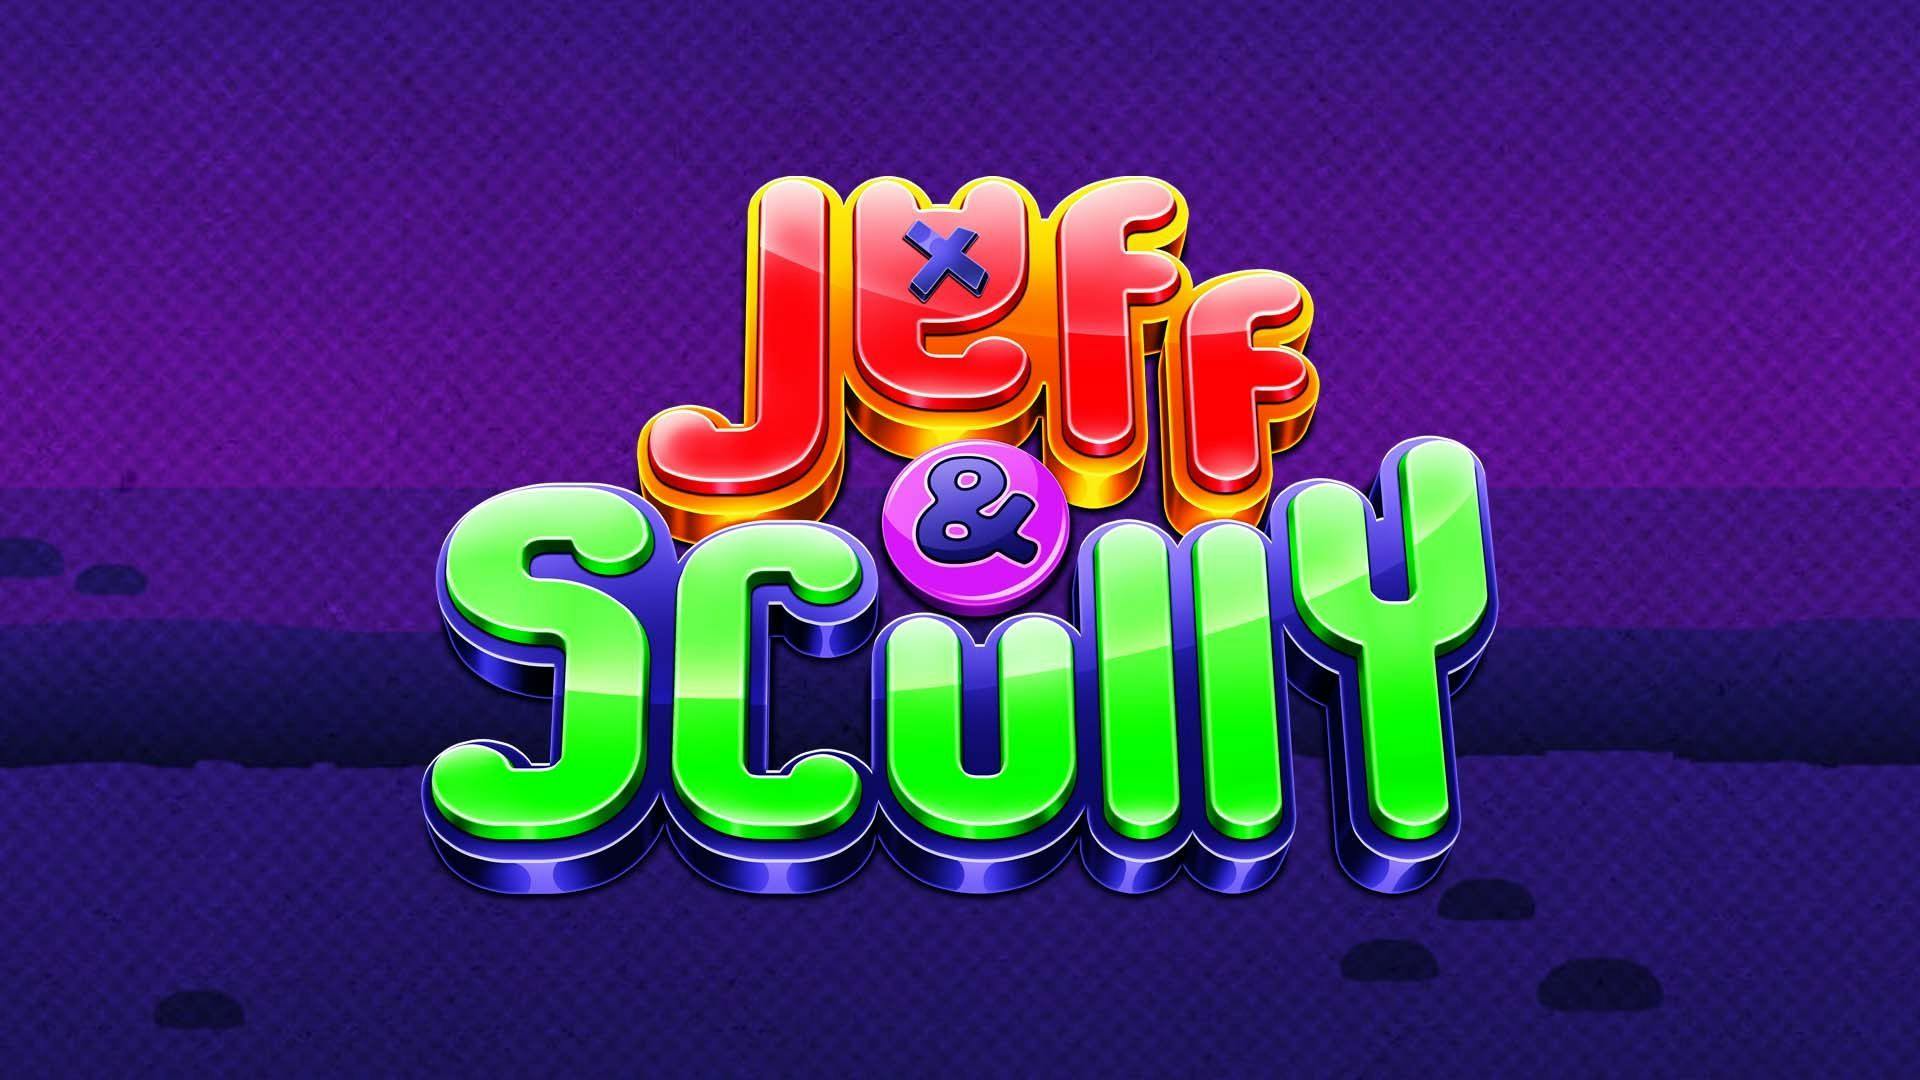 Jeff & Scully Slot Machine Online Free Game Play